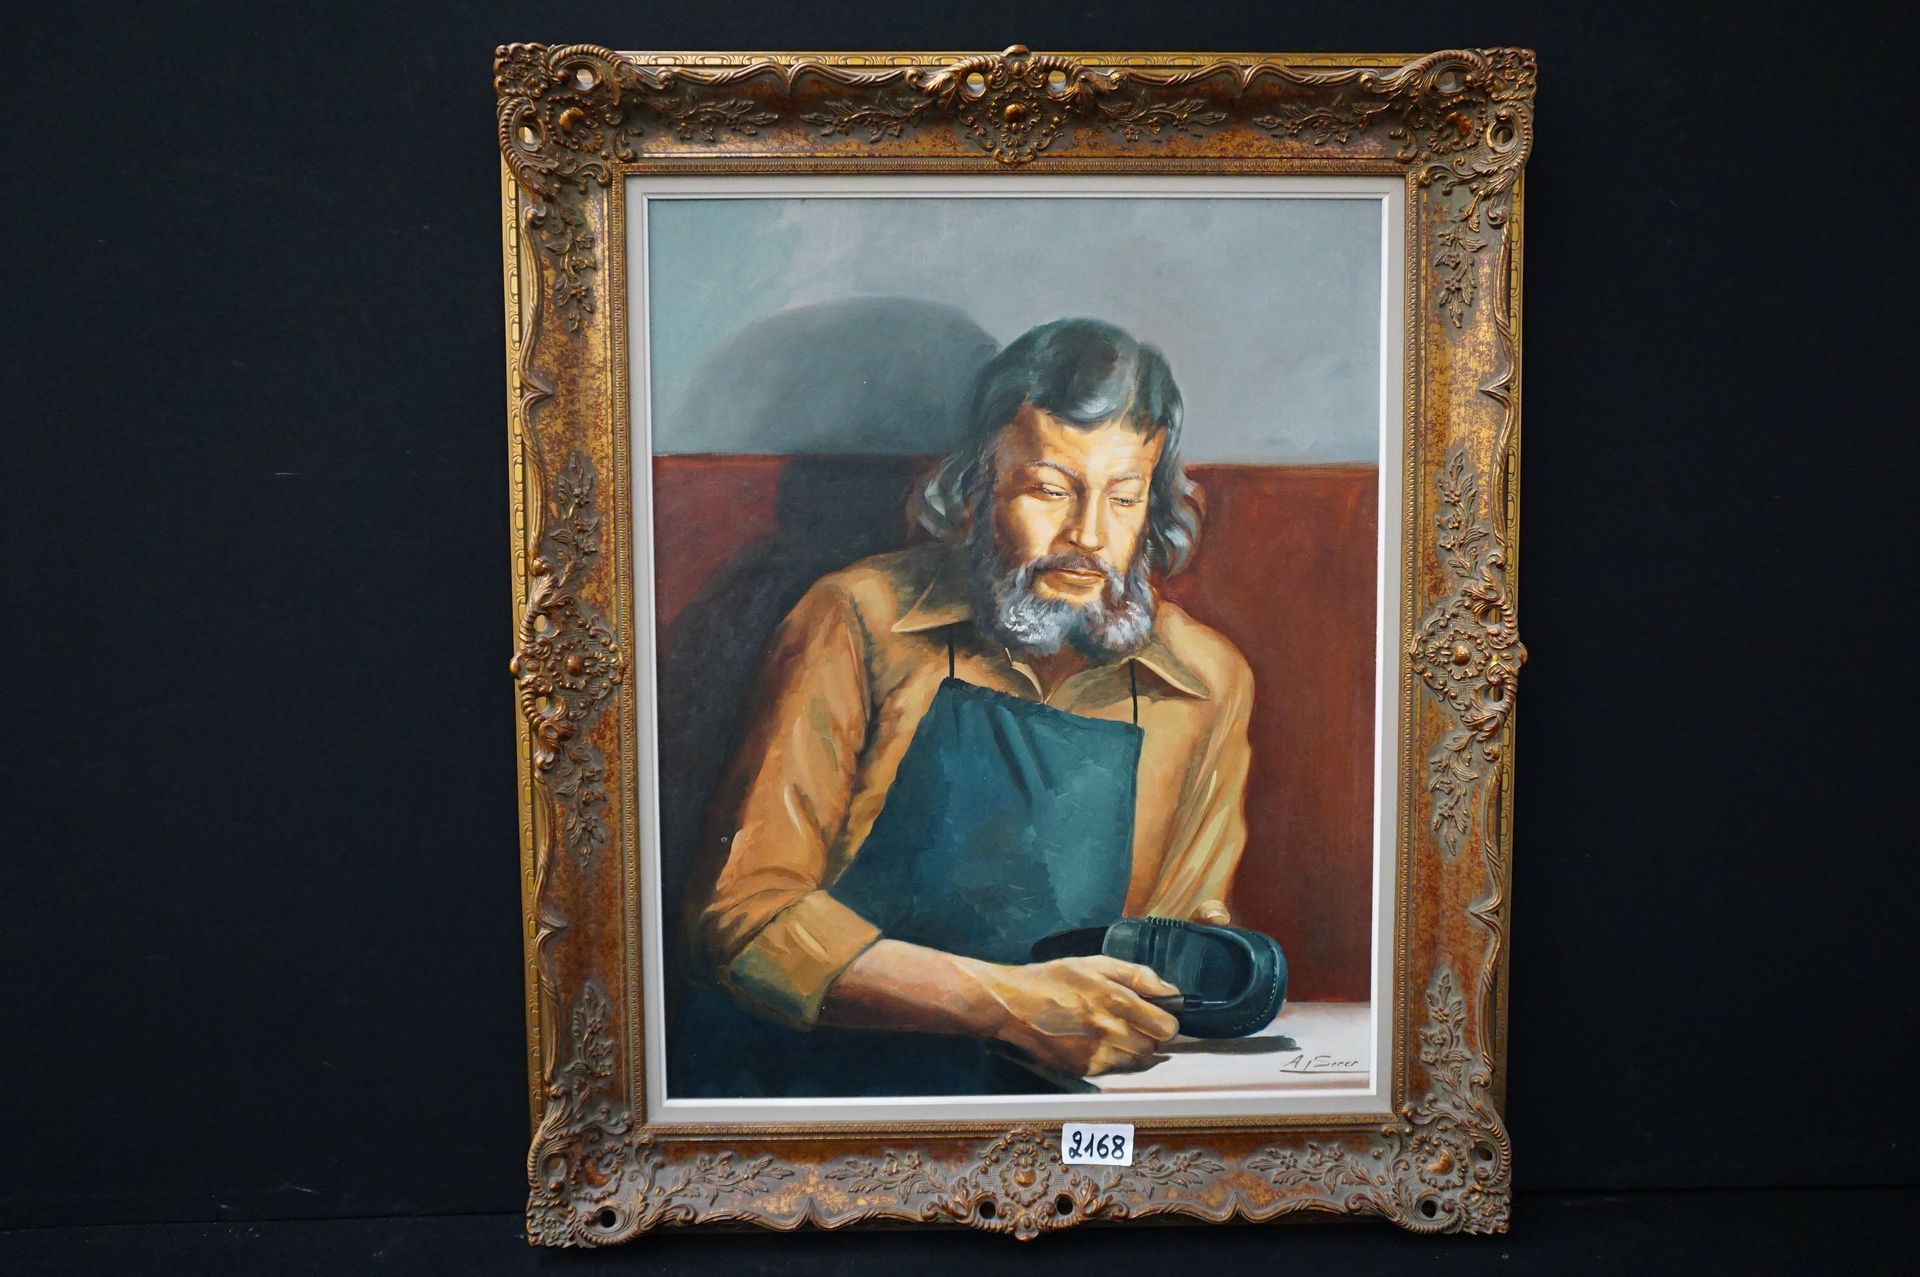 Null "The Shoemaker" - Oil on canvas - Signed - 81 x 65 cm